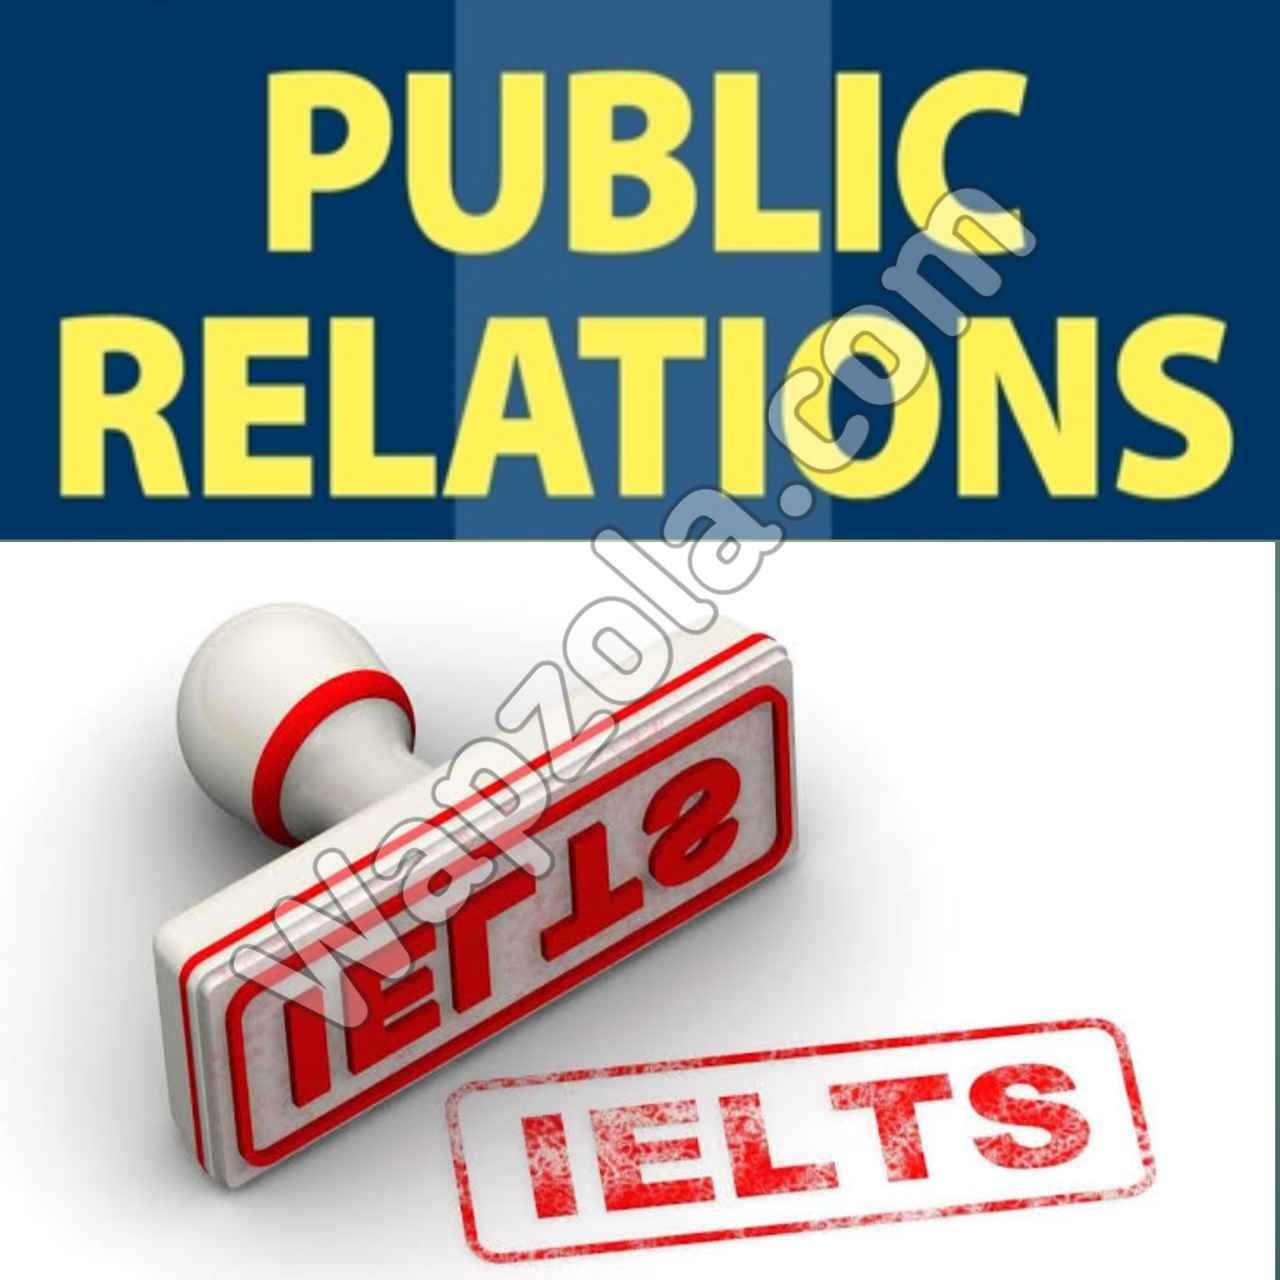 Simple Step By Step Process To Study IELTS for Public Relations In United Kingdom